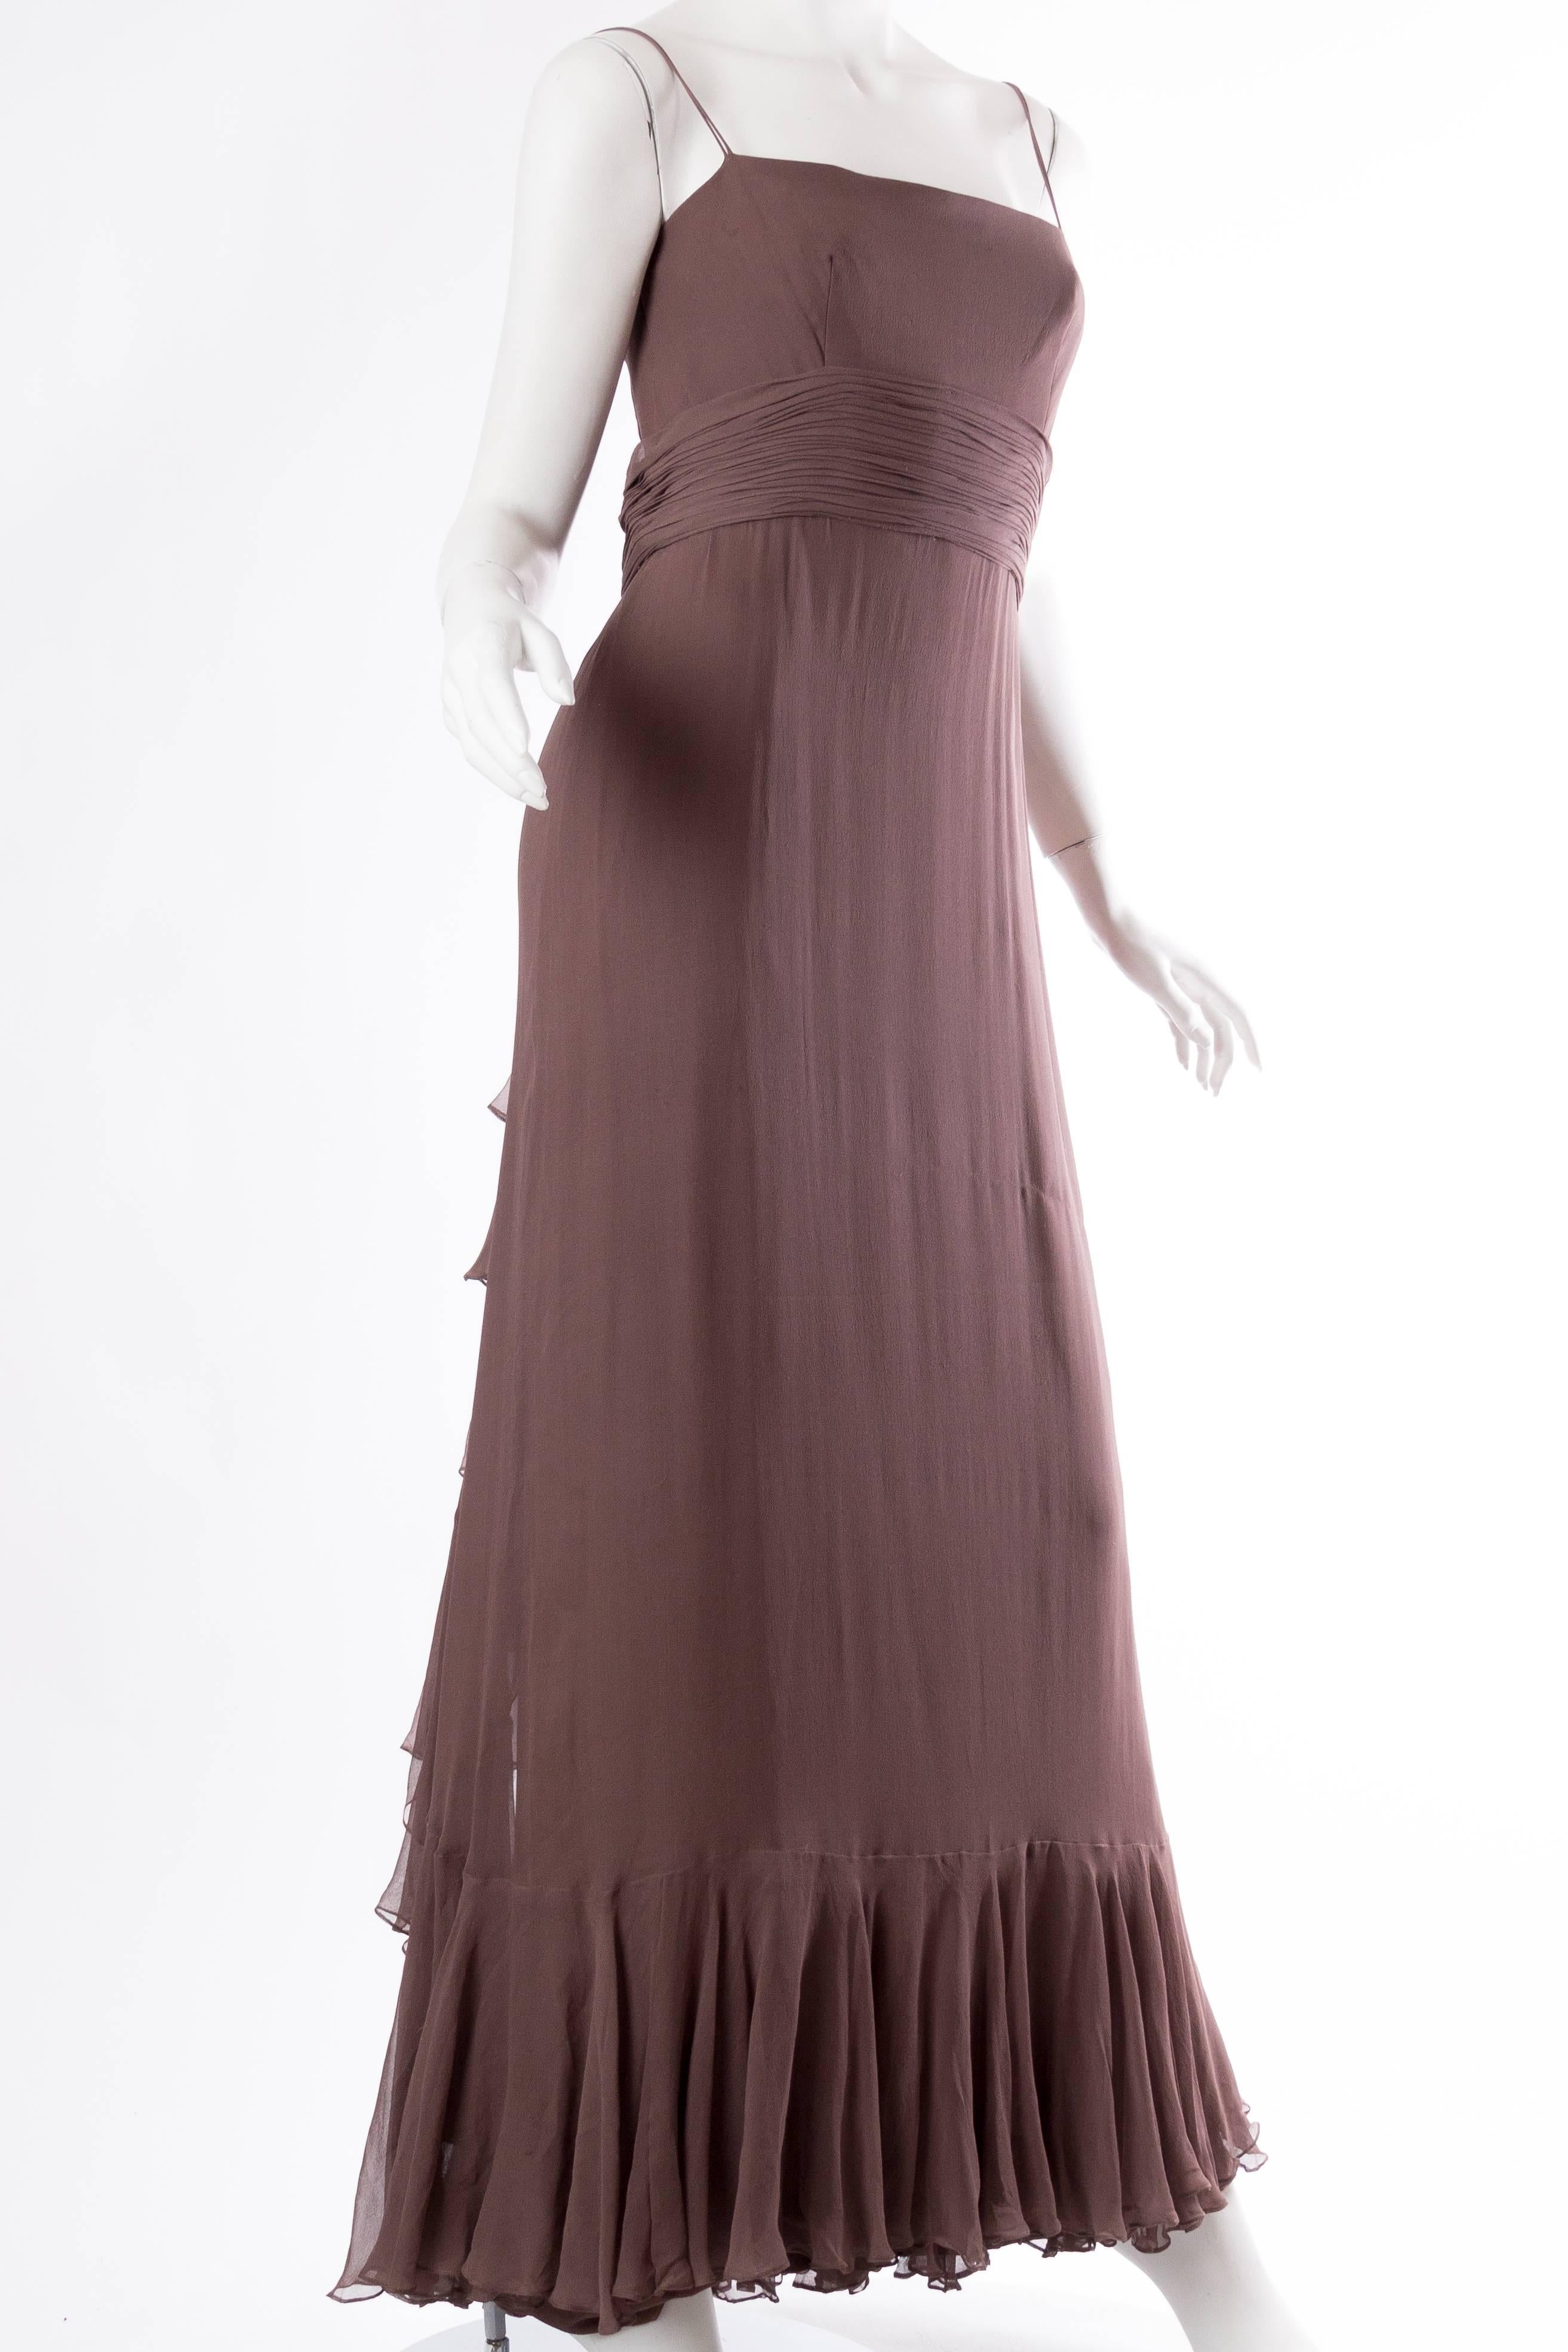 1970S MALCOLM STARR Chocolate Brown Silk Chiffon Boho Ruffled Gown In Excellent Condition For Sale In New York, NY